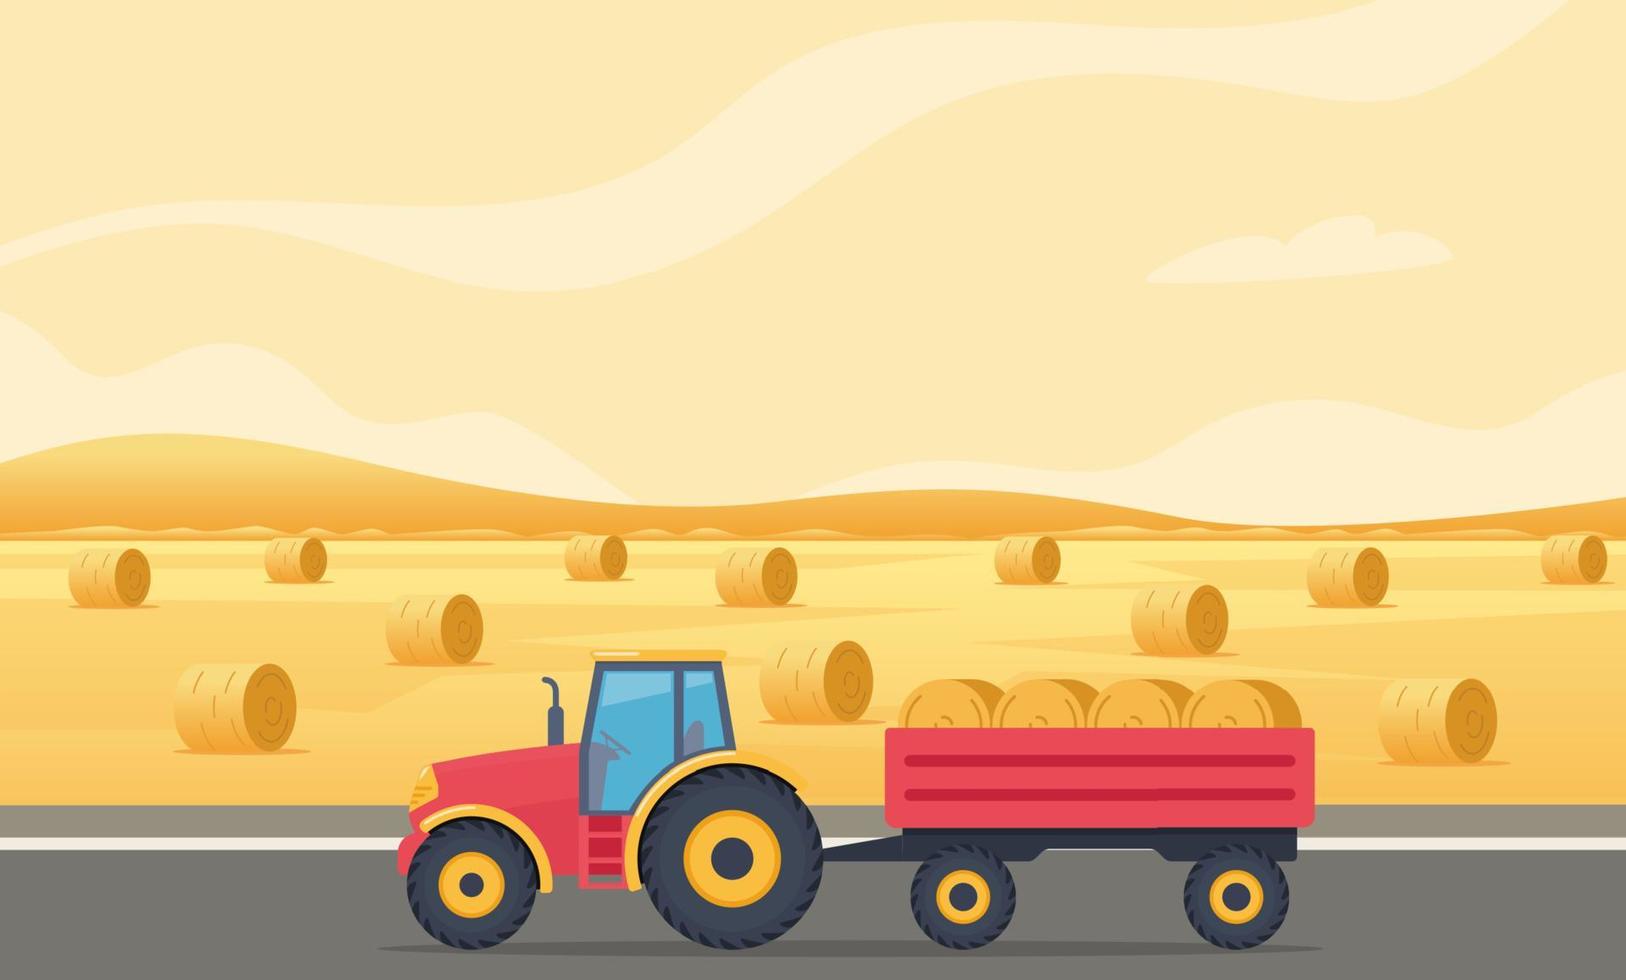 Farm scene with field and haystacks at sunset. Tractor with hay bales in cart. Rural landscape. Agriculture and farming concept. Farm Machine. Vector Illustration.